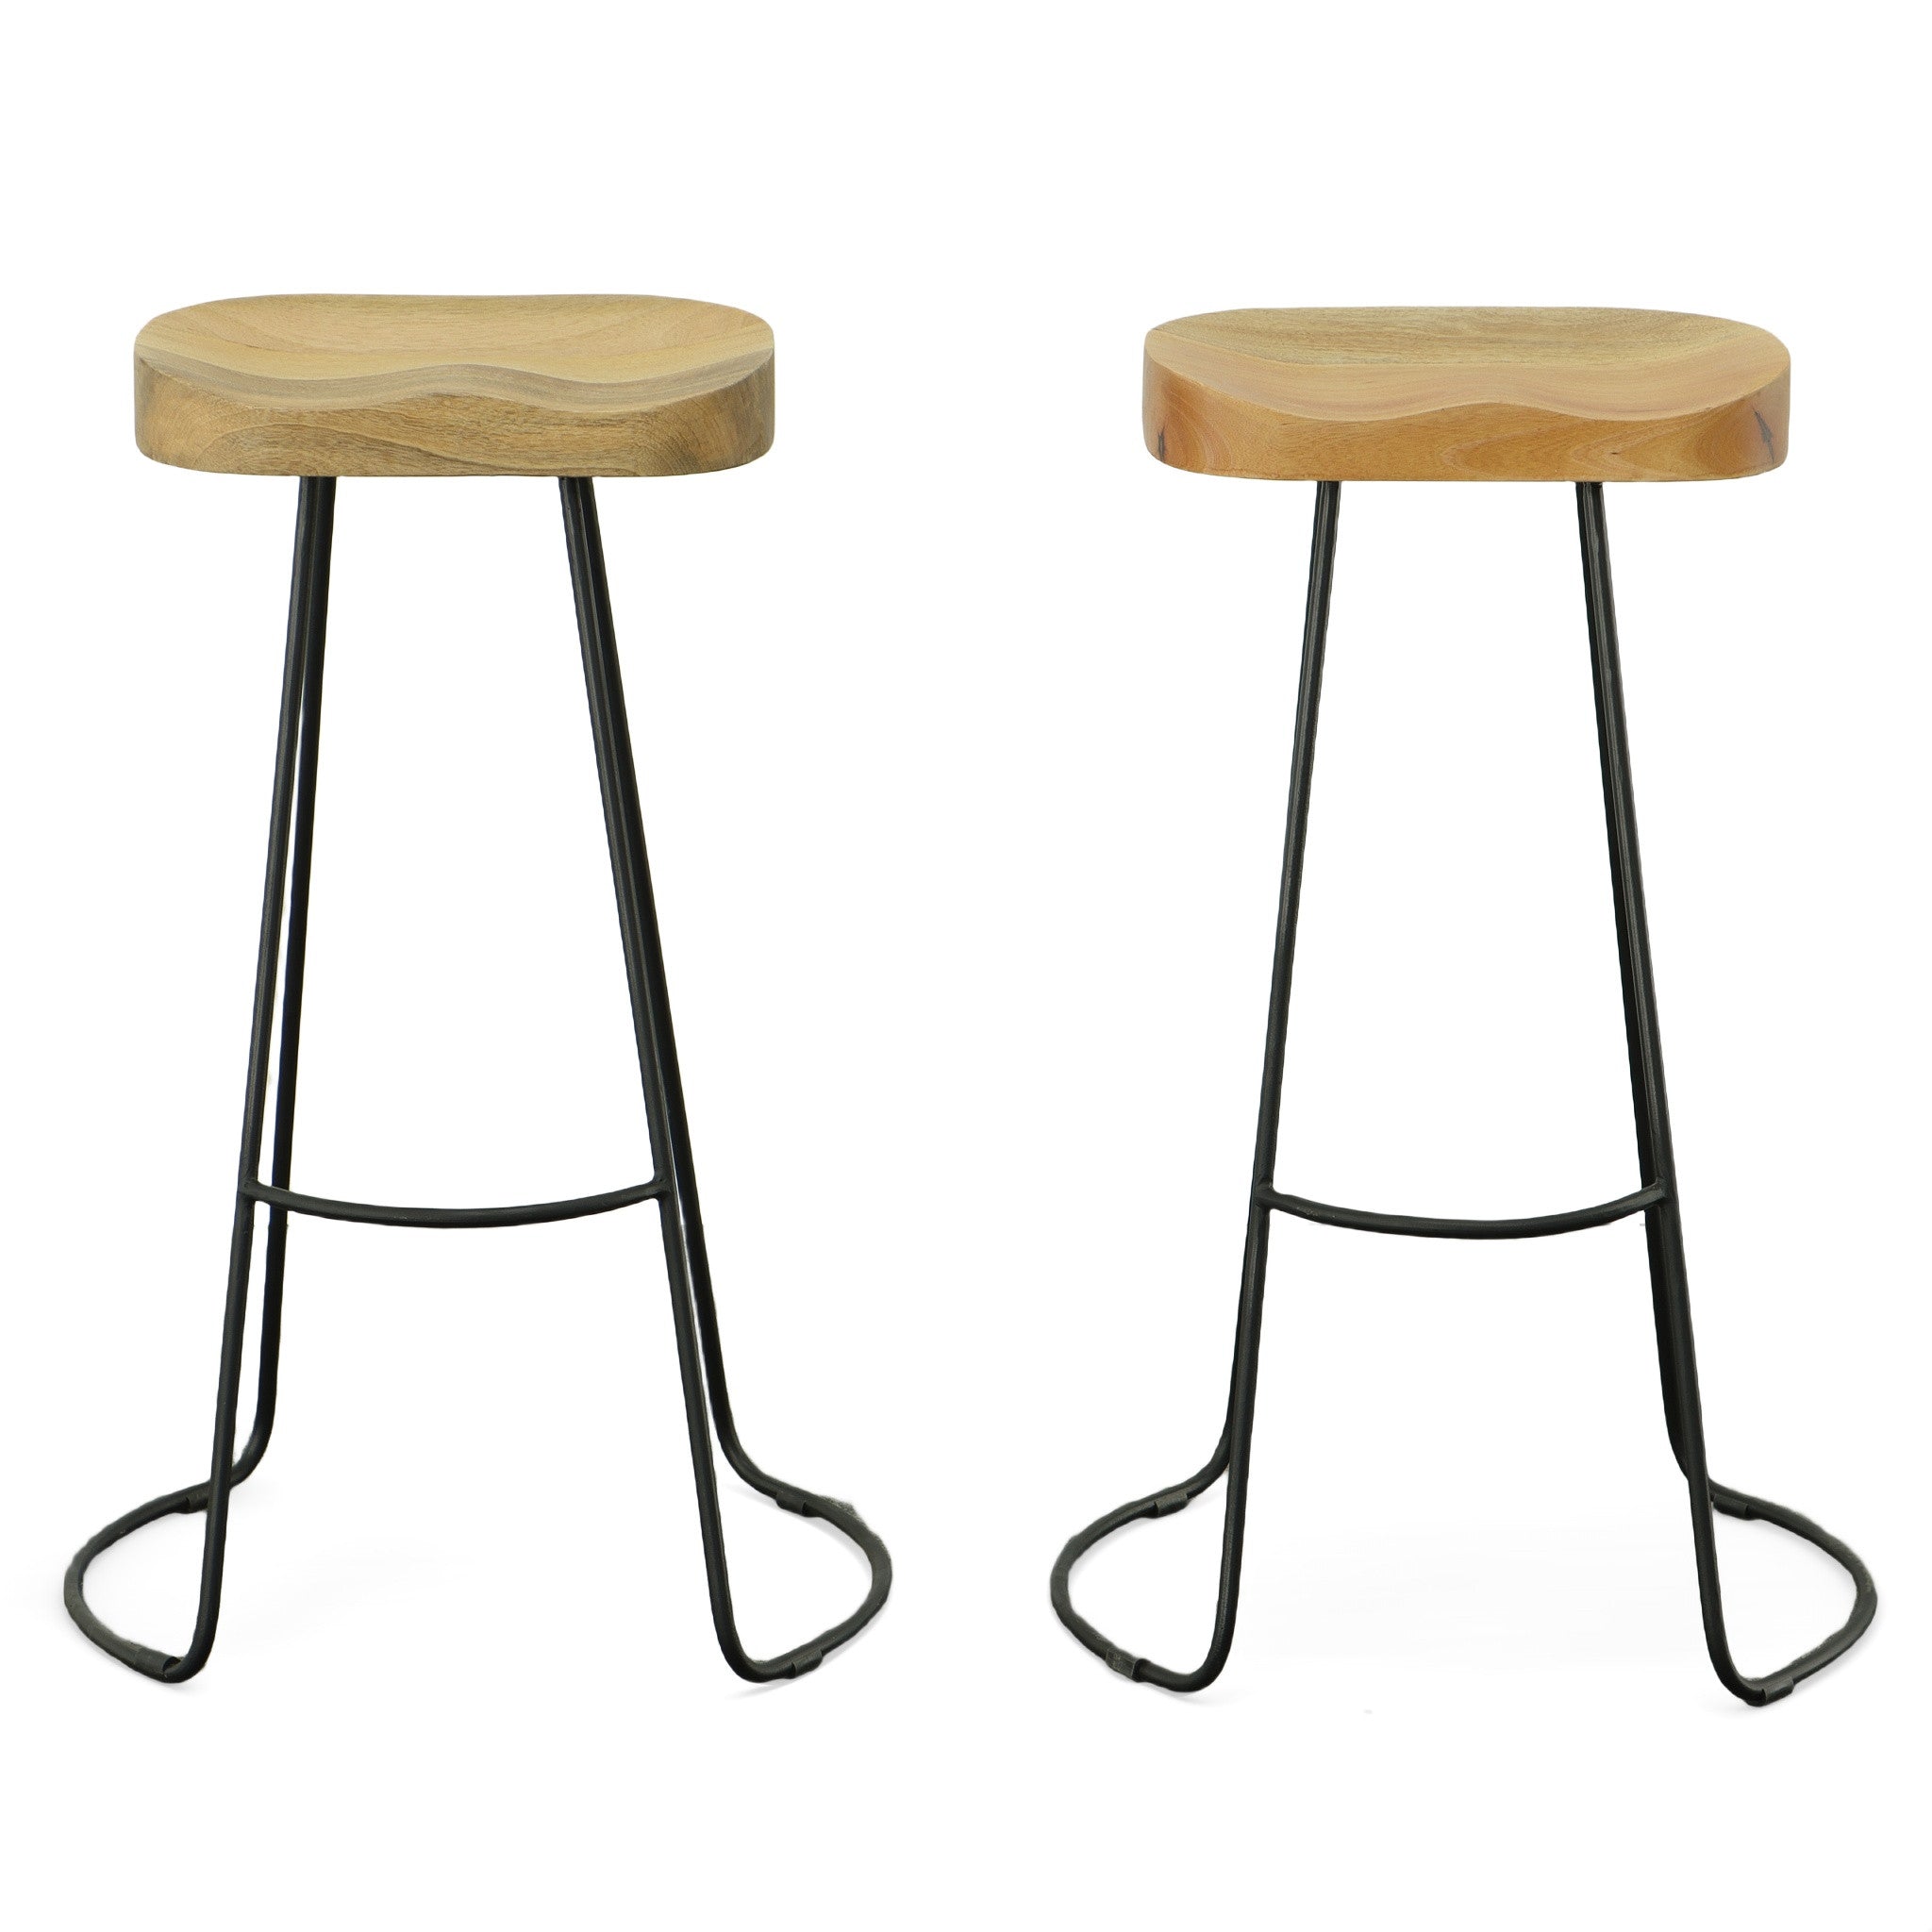 Set of Two 31" Natural And Black Steel Backless Bar Height Bar Chairs